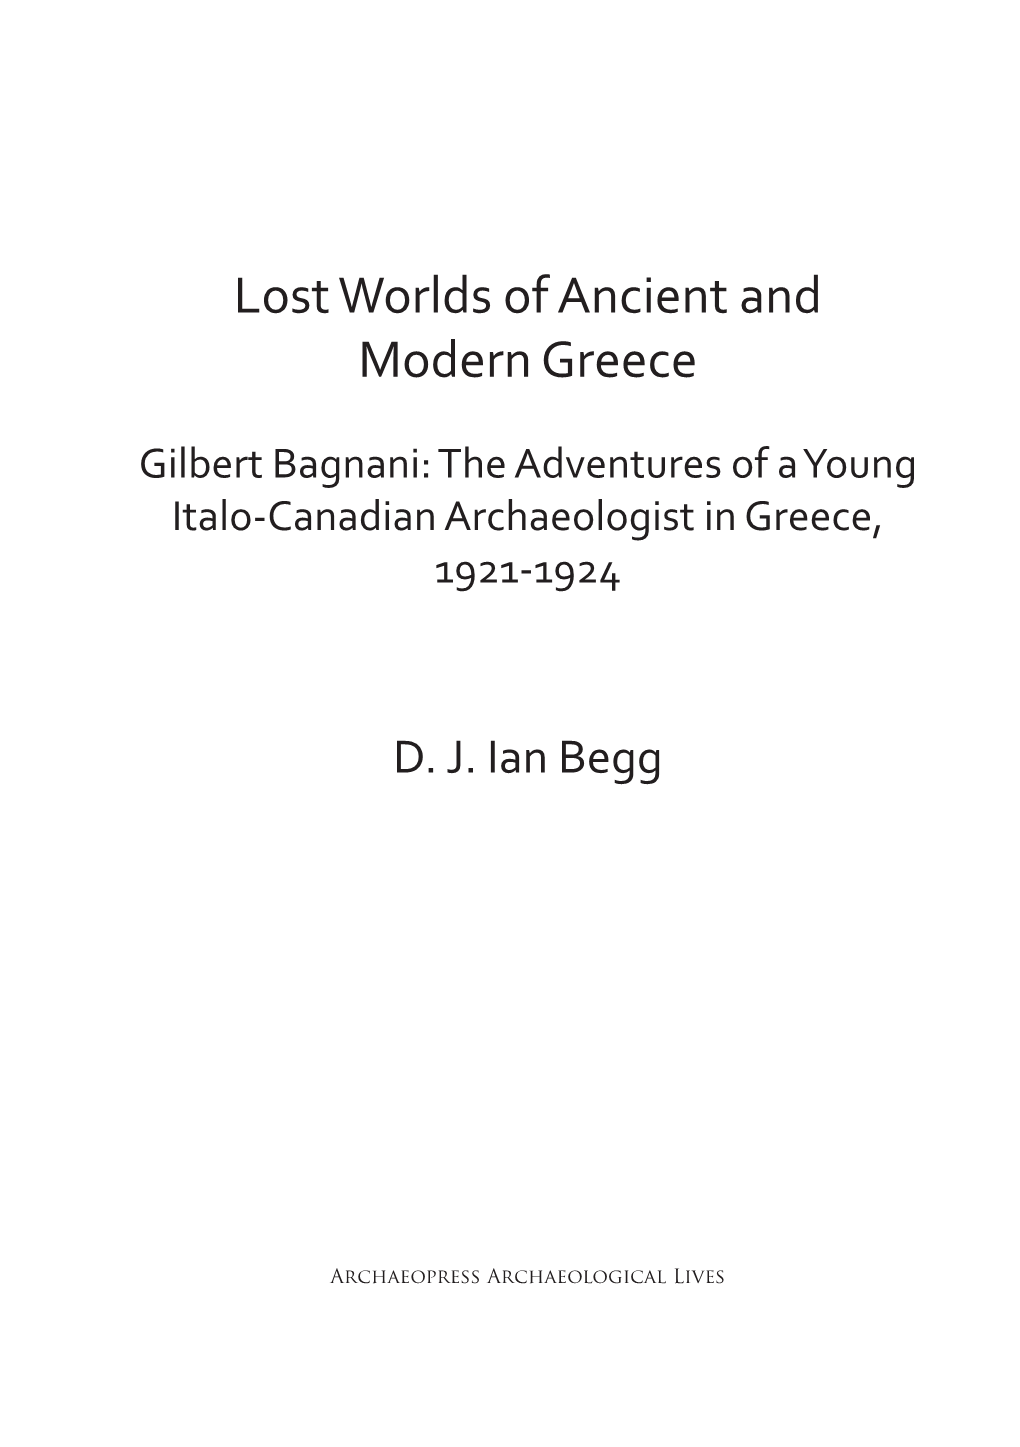 Lost Worlds of Ancient and Modern Greece